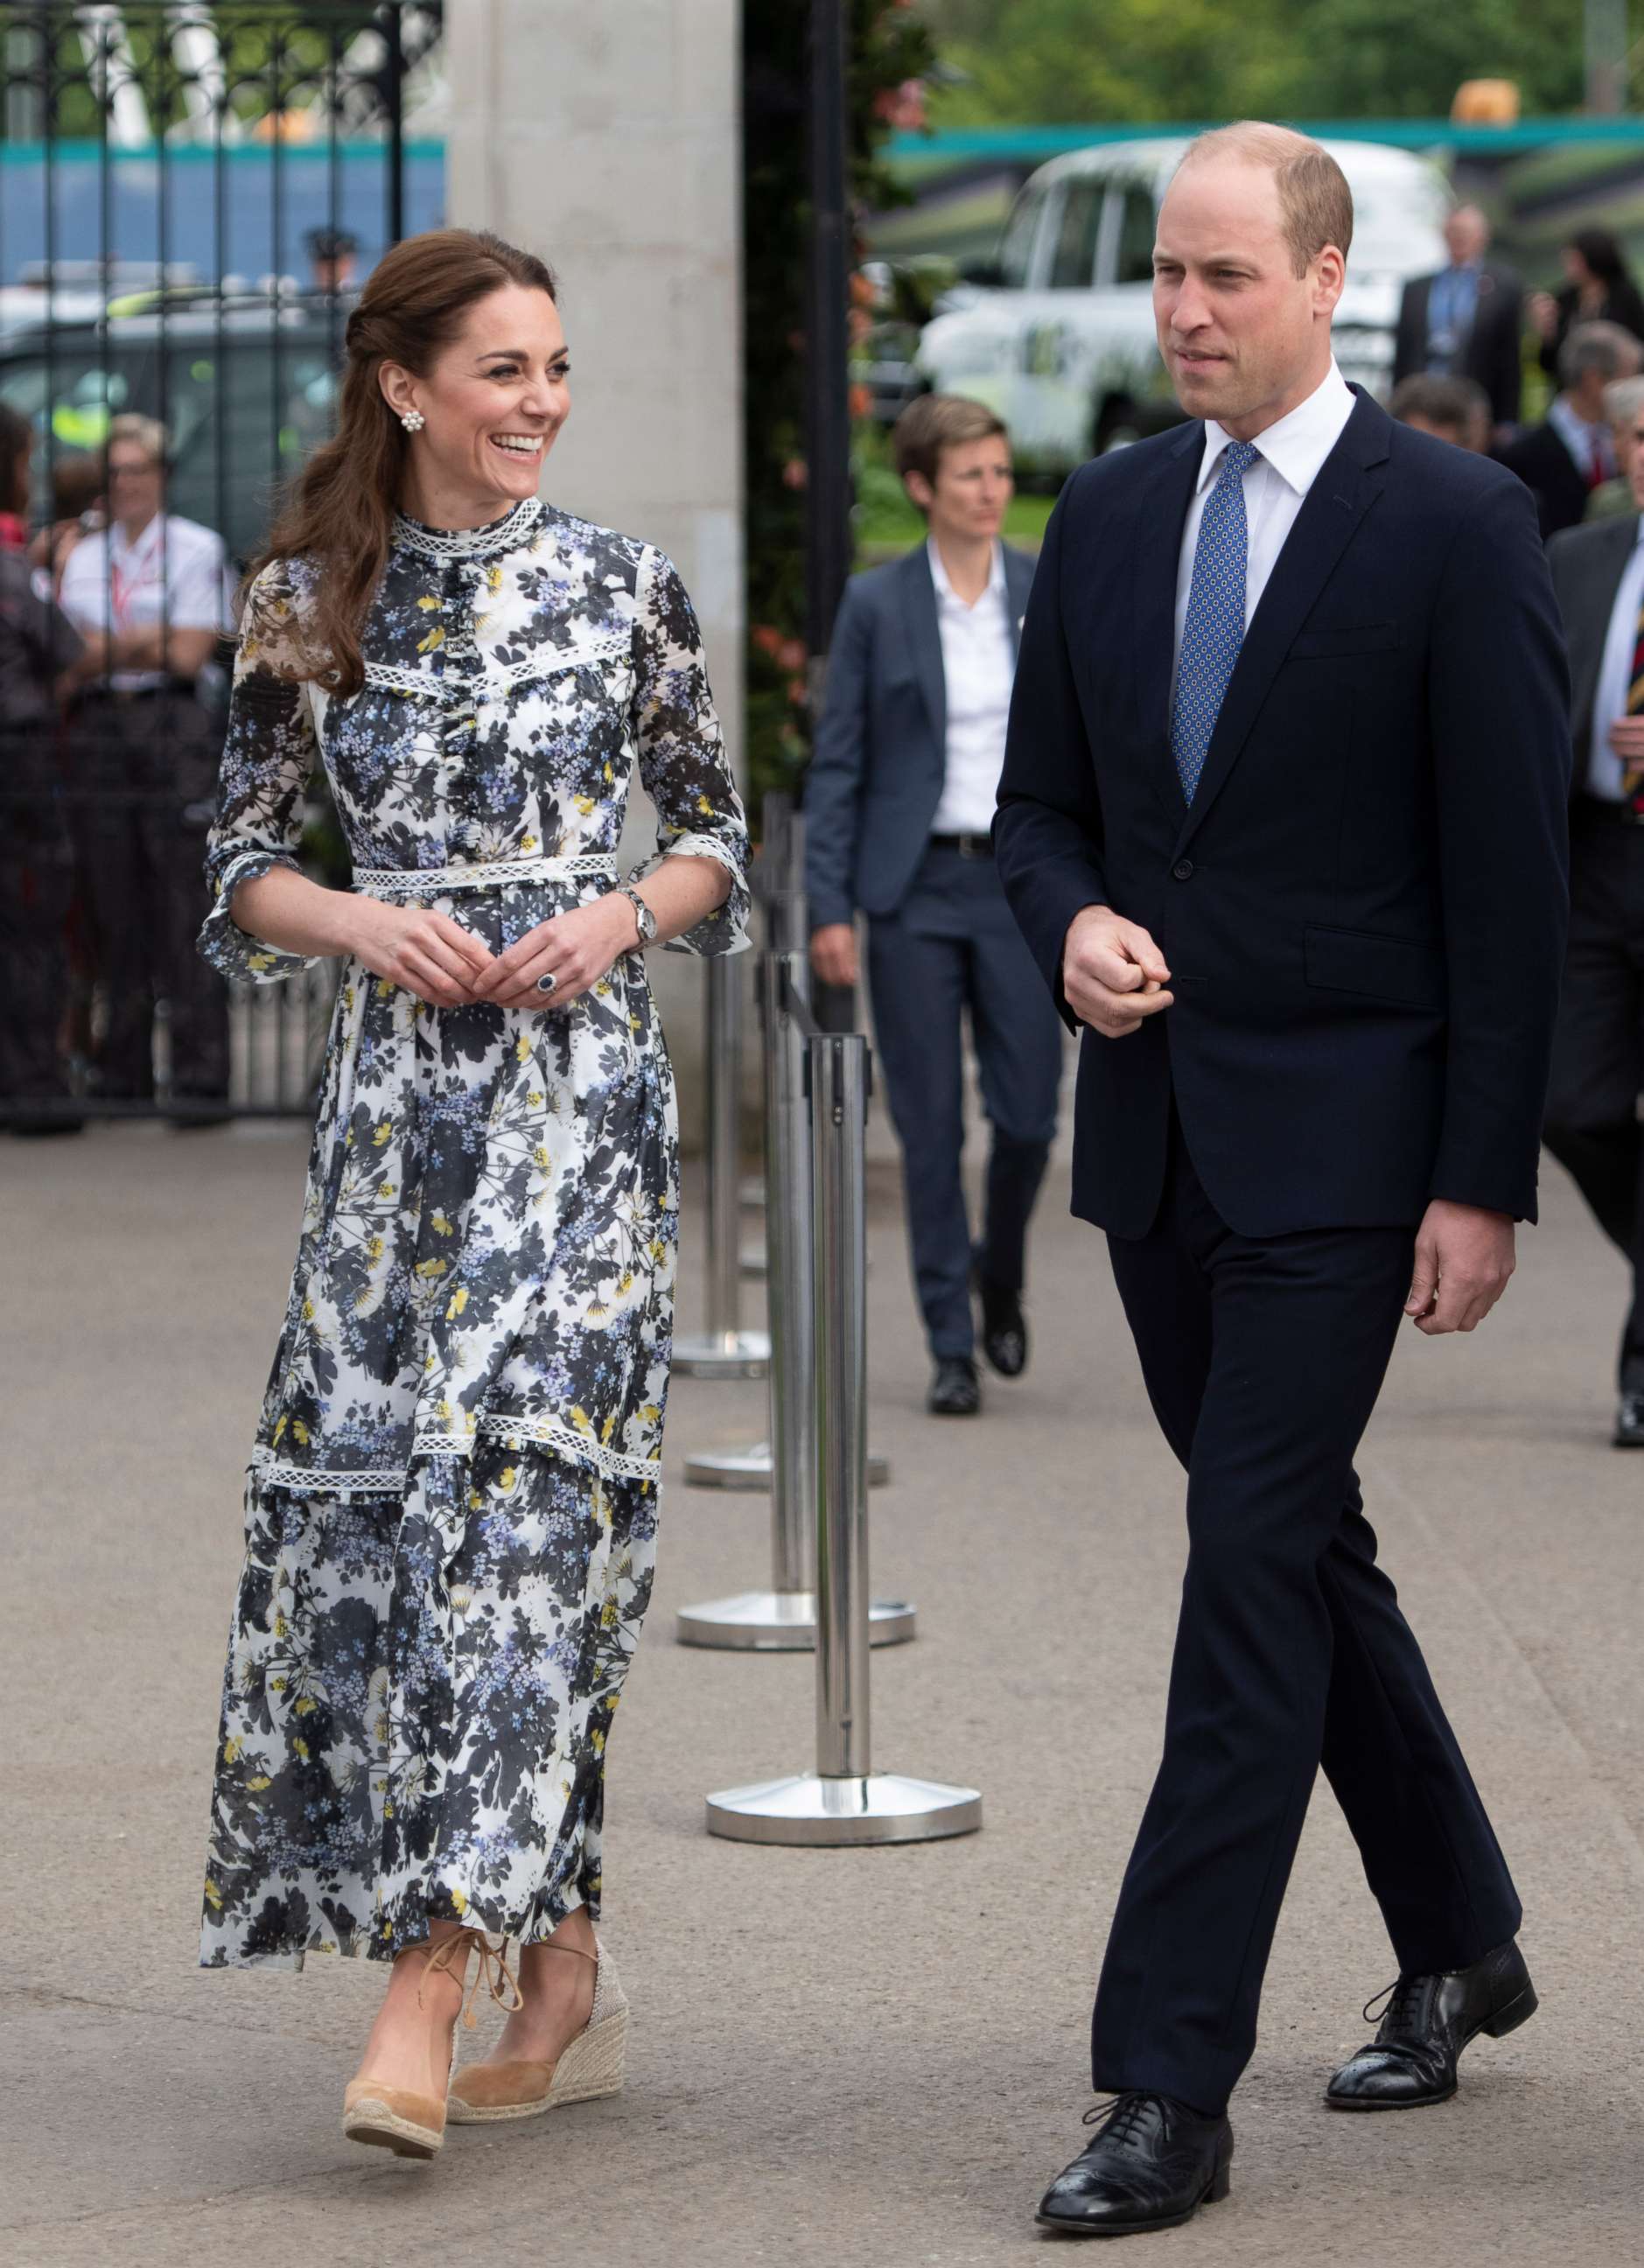 PHOTO: Catherine, Duchess of Cambridge and Prince William at the RHS Chelsea Flower Show 2019 press day at Chelsea Flower Show, May 20, 2019, in London.